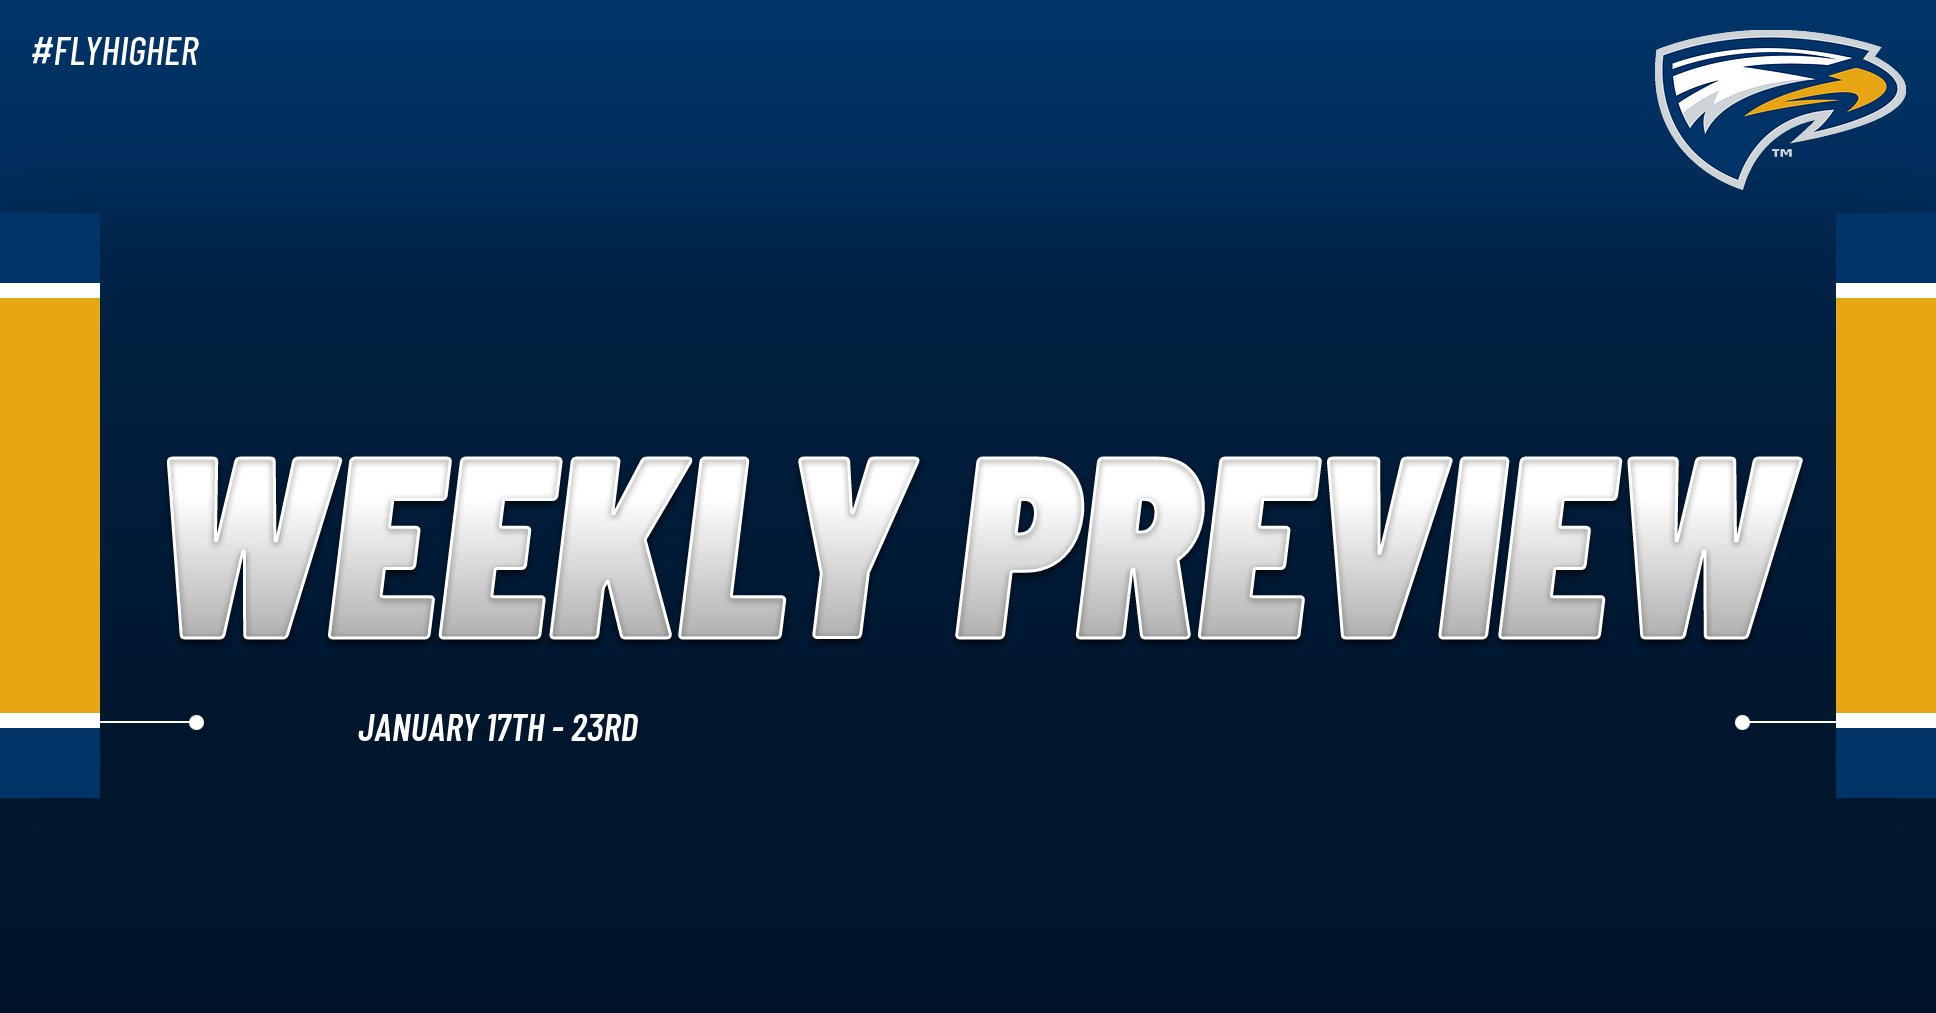 Emory Athletics Weekly Preview - January 17th - 23rd